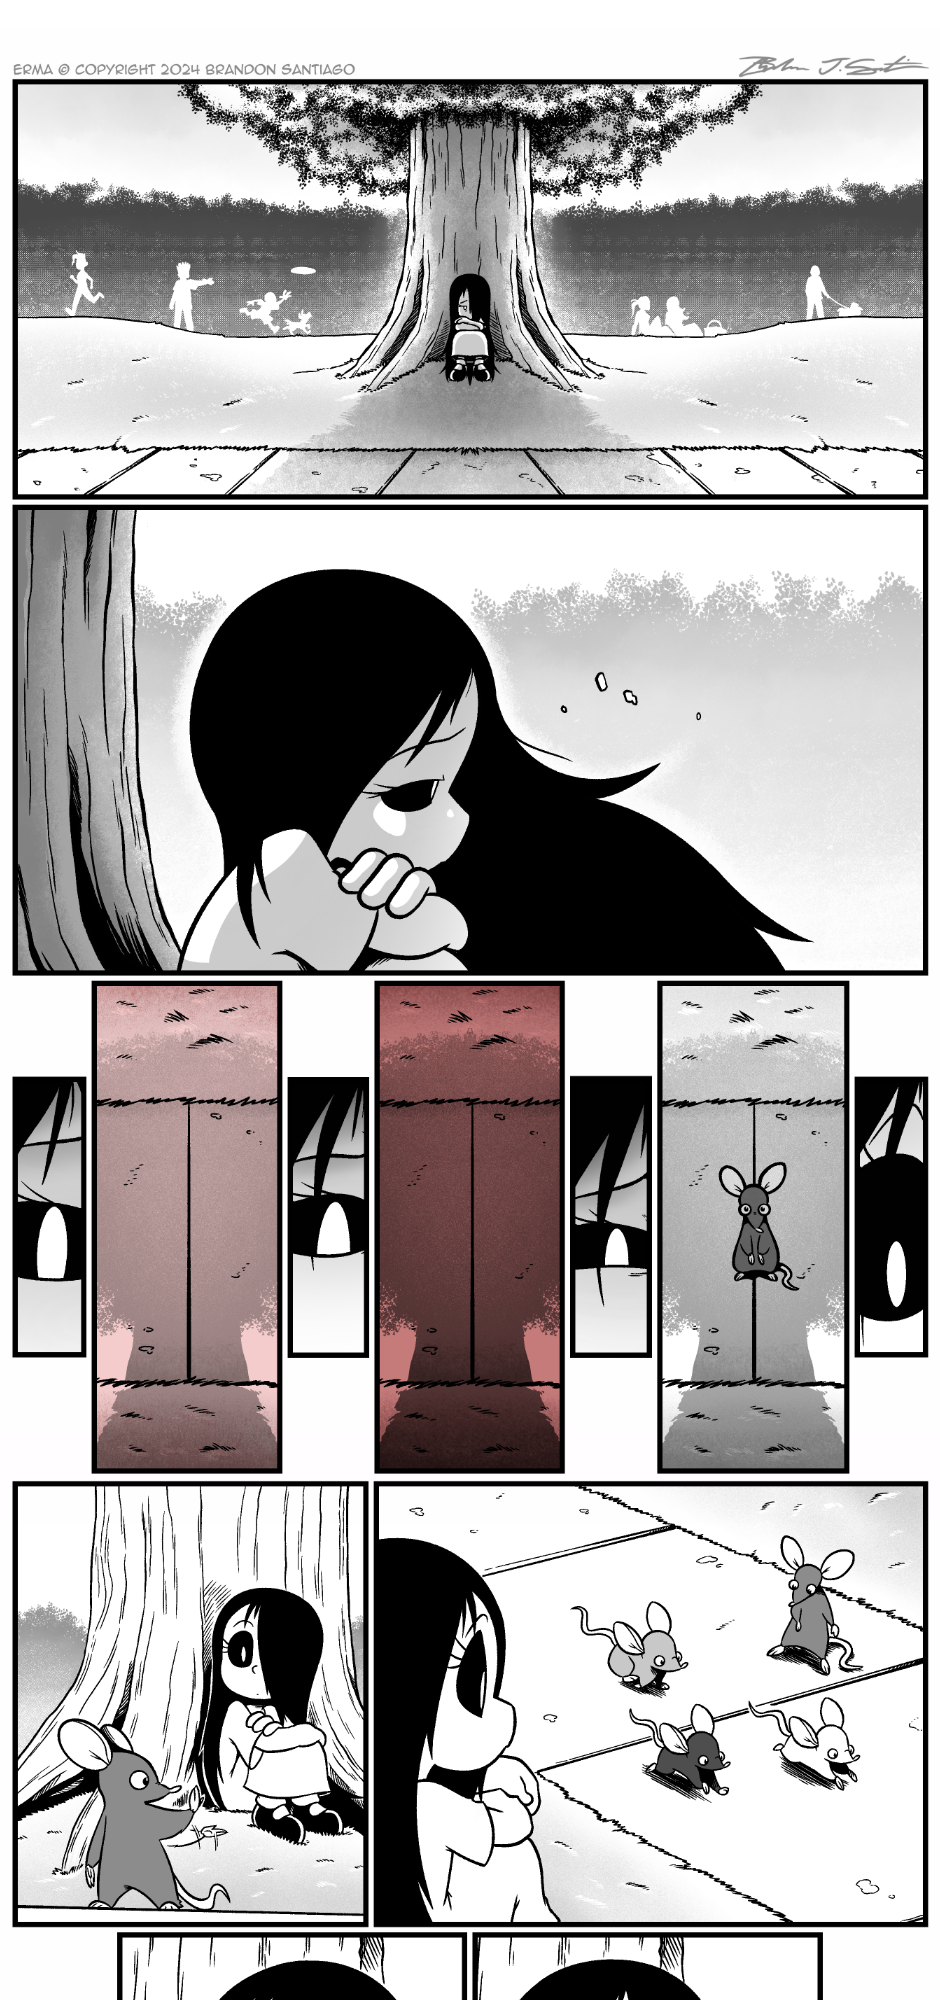 Comics feed - Erma : The Aftermath Part 4/6